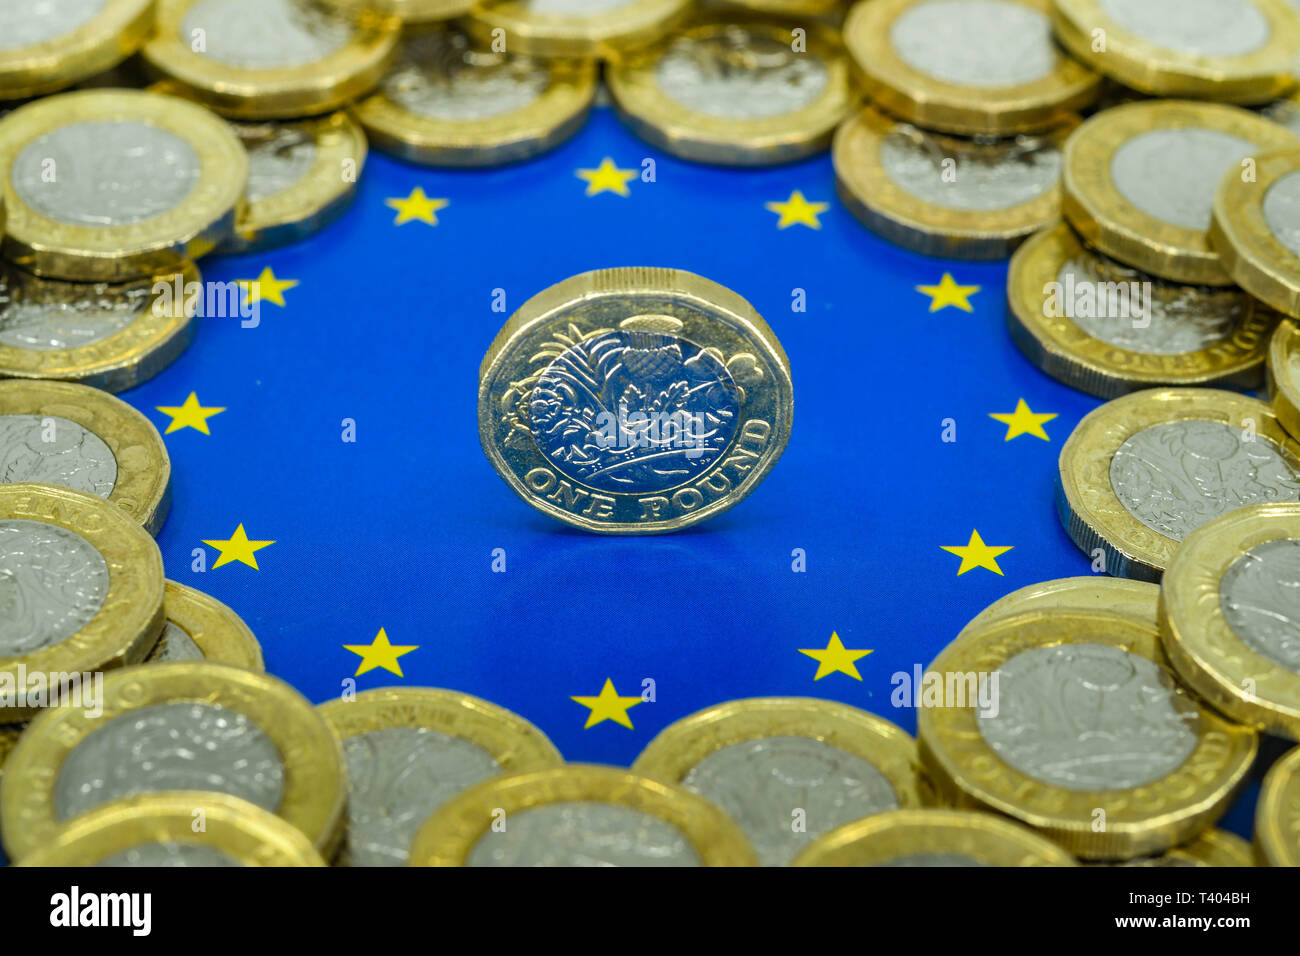 LONDON, UK - APRIL 2019: Close up view of British currency GBP - One Pound coin balance on its edge in the centre of the logo of the European Union. Stock Photo